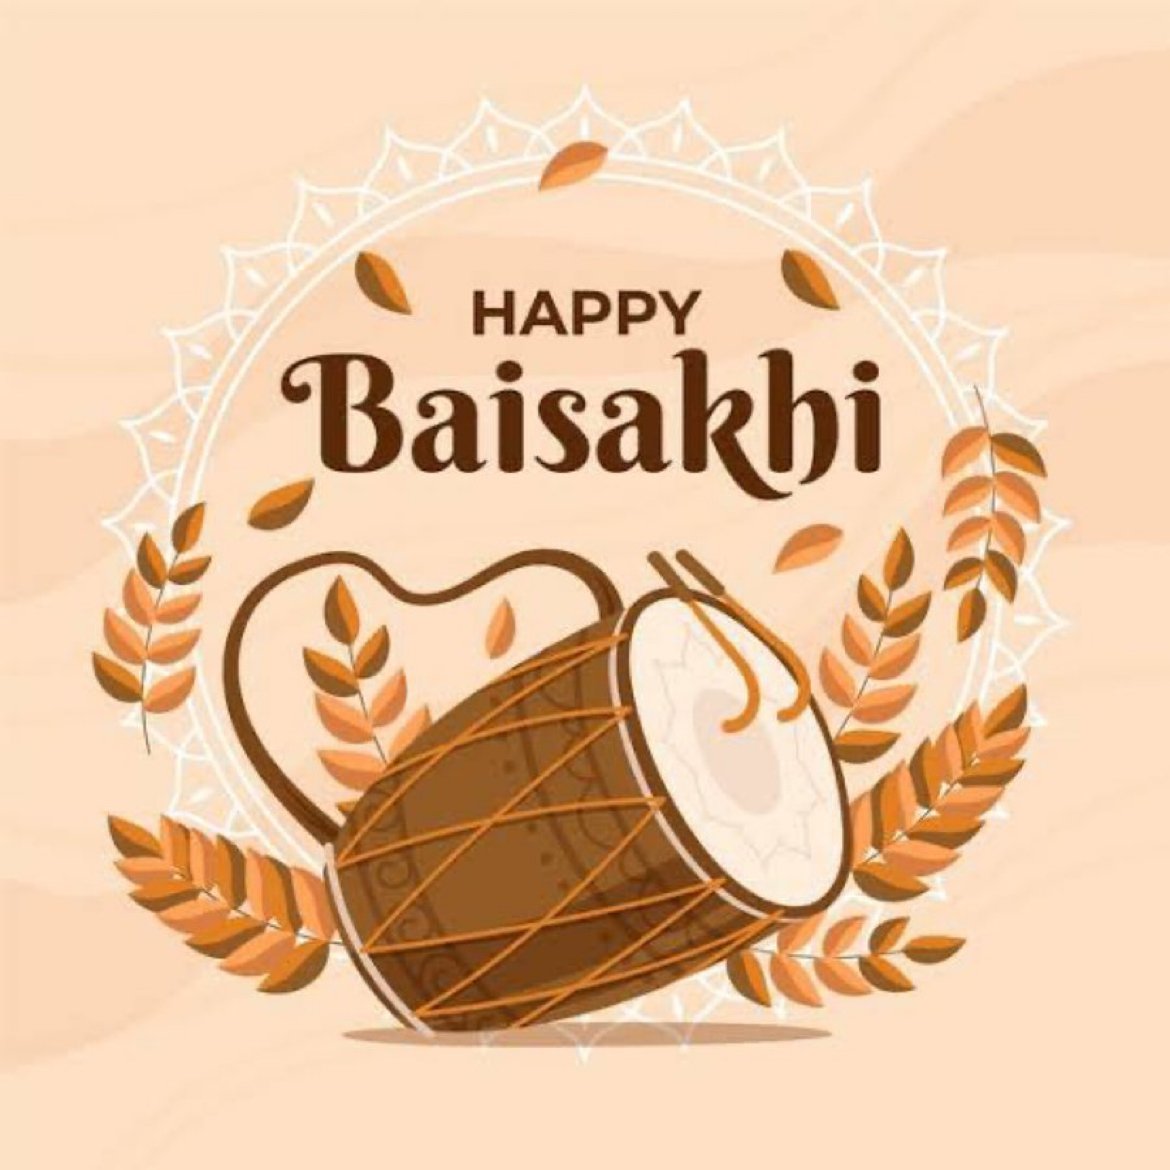 HAPPY BAISAKHI! On this auspicious occasion, Deputy Commissioner Budgam, @akshaylabroo extends his heartiest greetings. May the spirit of Baisakhi fill your hearts with happiness, peace and prosperity. @dicbudgam @ddnewsSrinagar